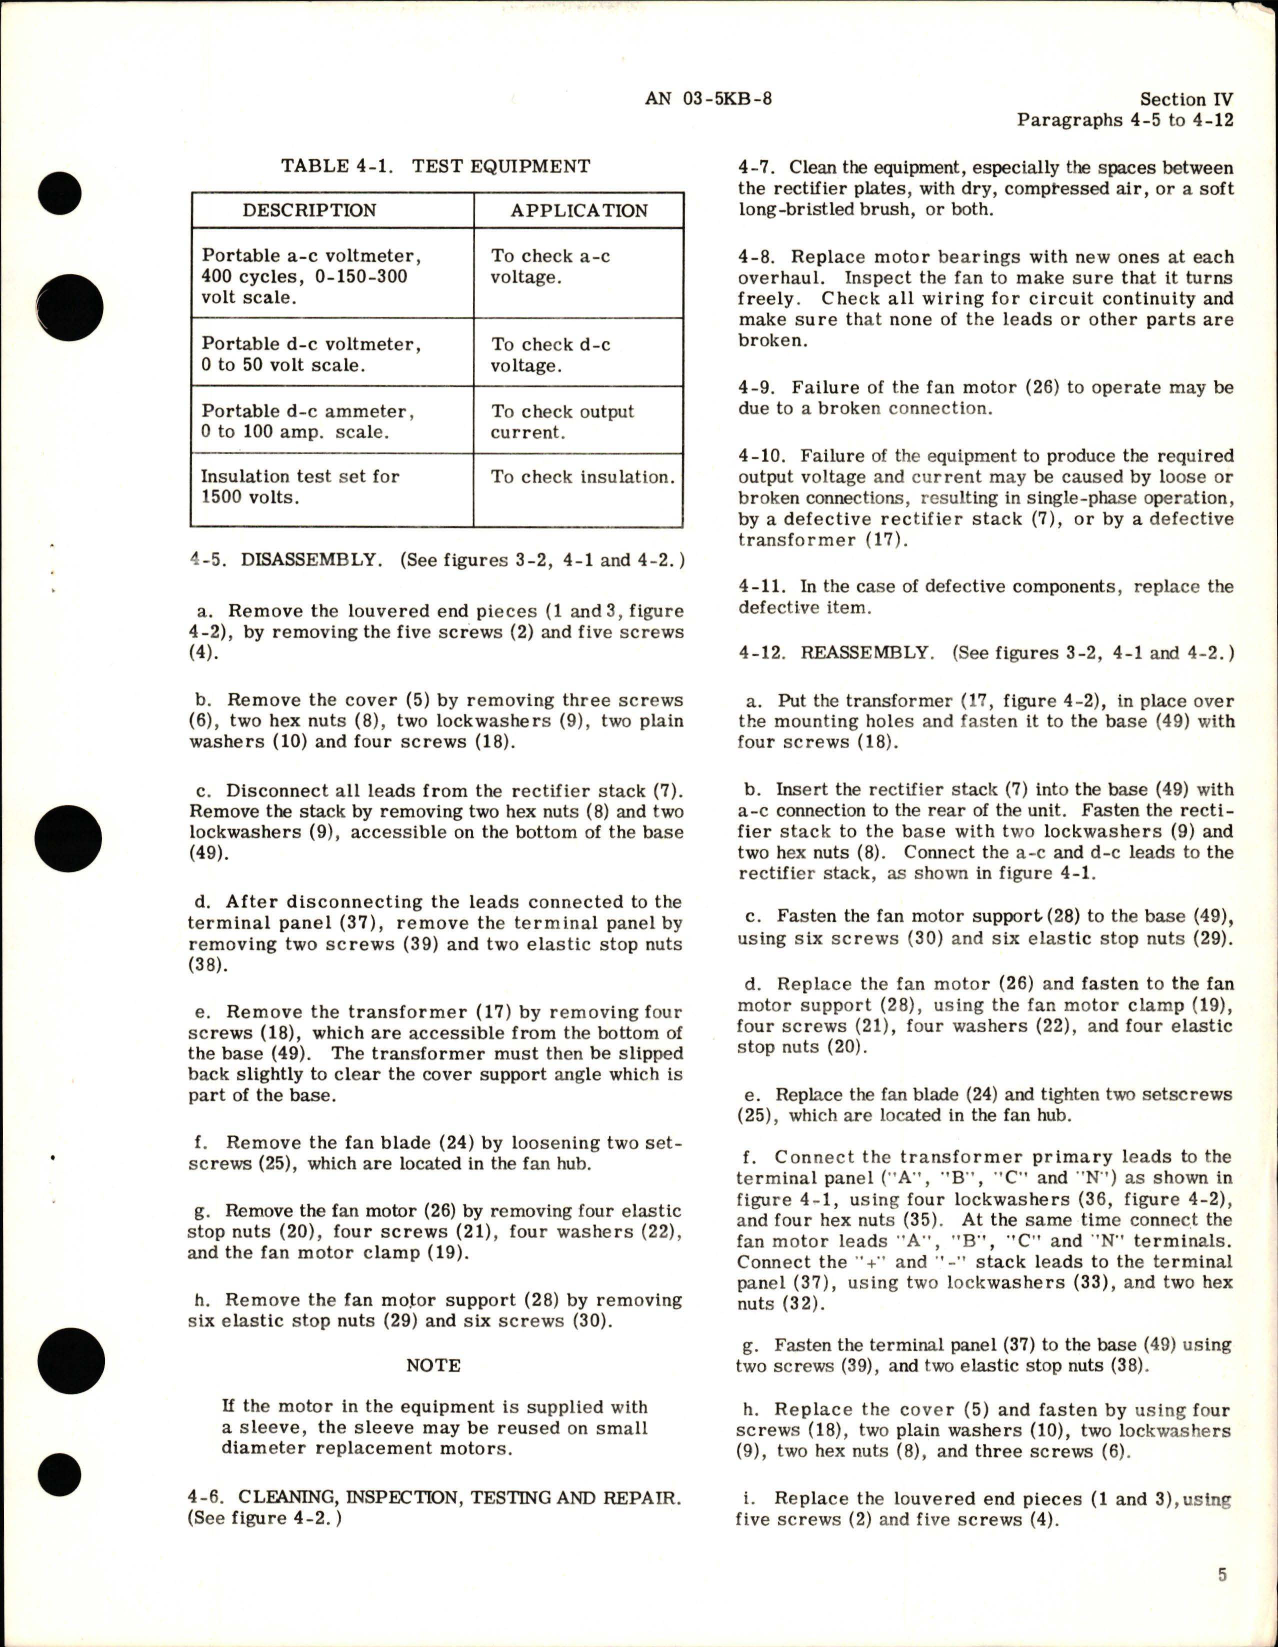 Sample page 5 from AirCorps Library document: Overhaul Instructions for Transformer Rectifier 